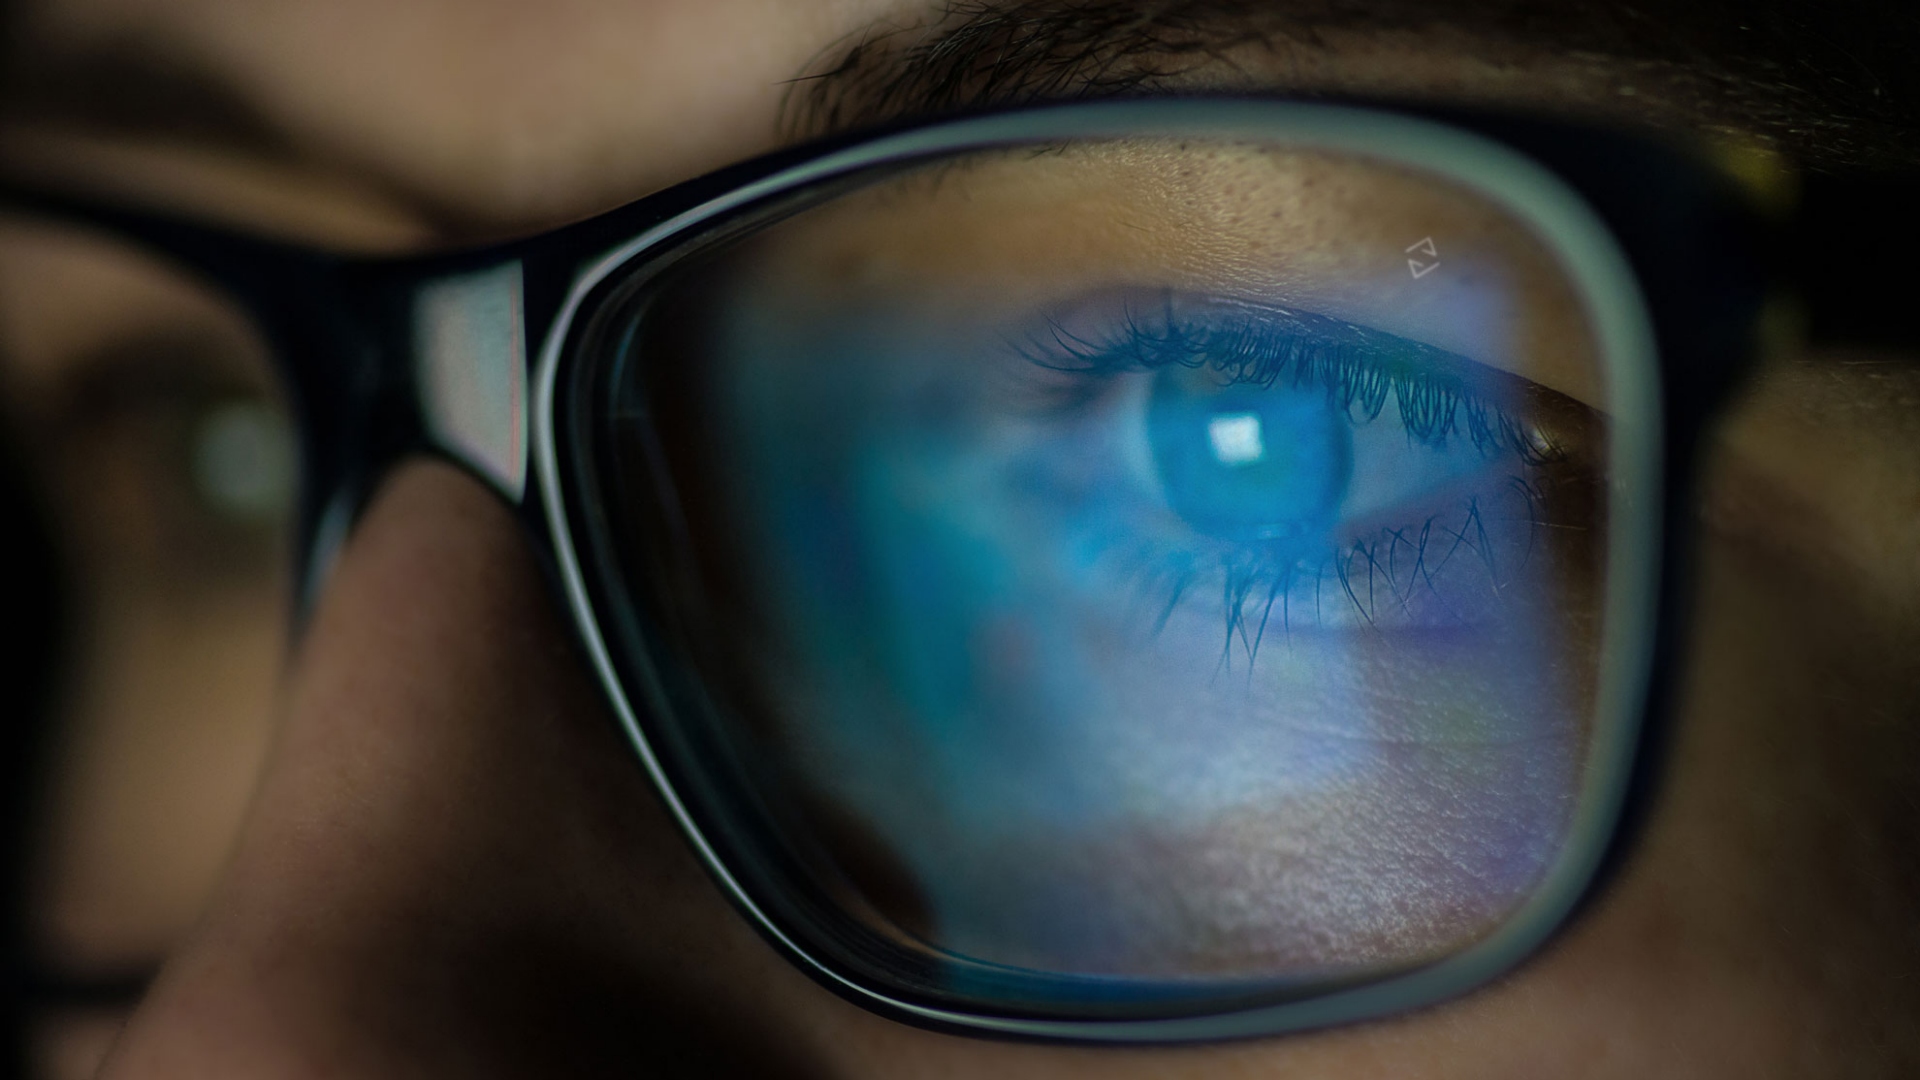 Peripheral vision and spectacle lenses 